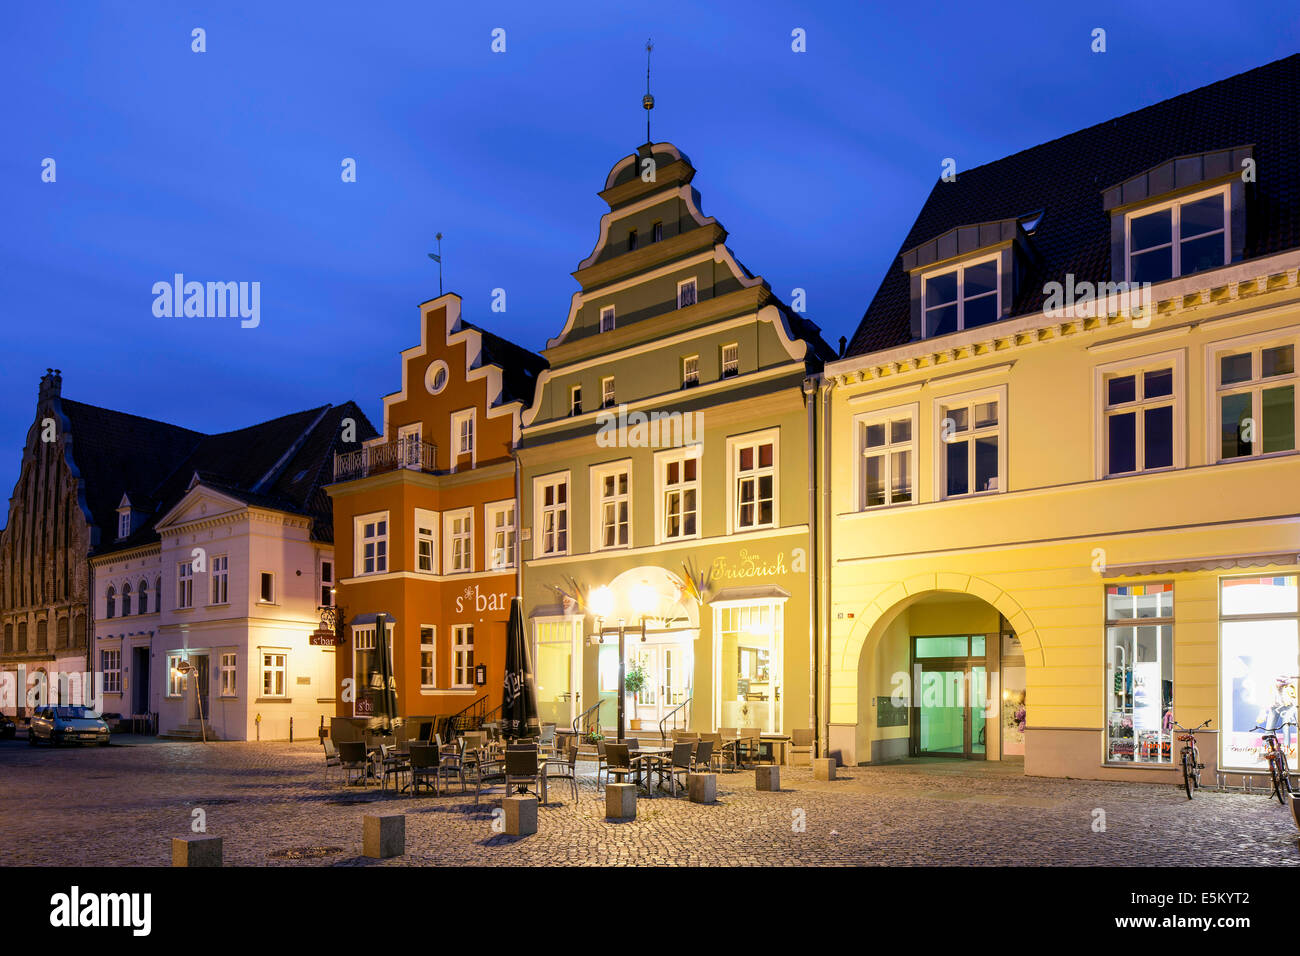 North German gabled houses on the market square, Hanseatic City of Greifswald, Mecklenburg-Western Pomerania, Germany Stock Photo